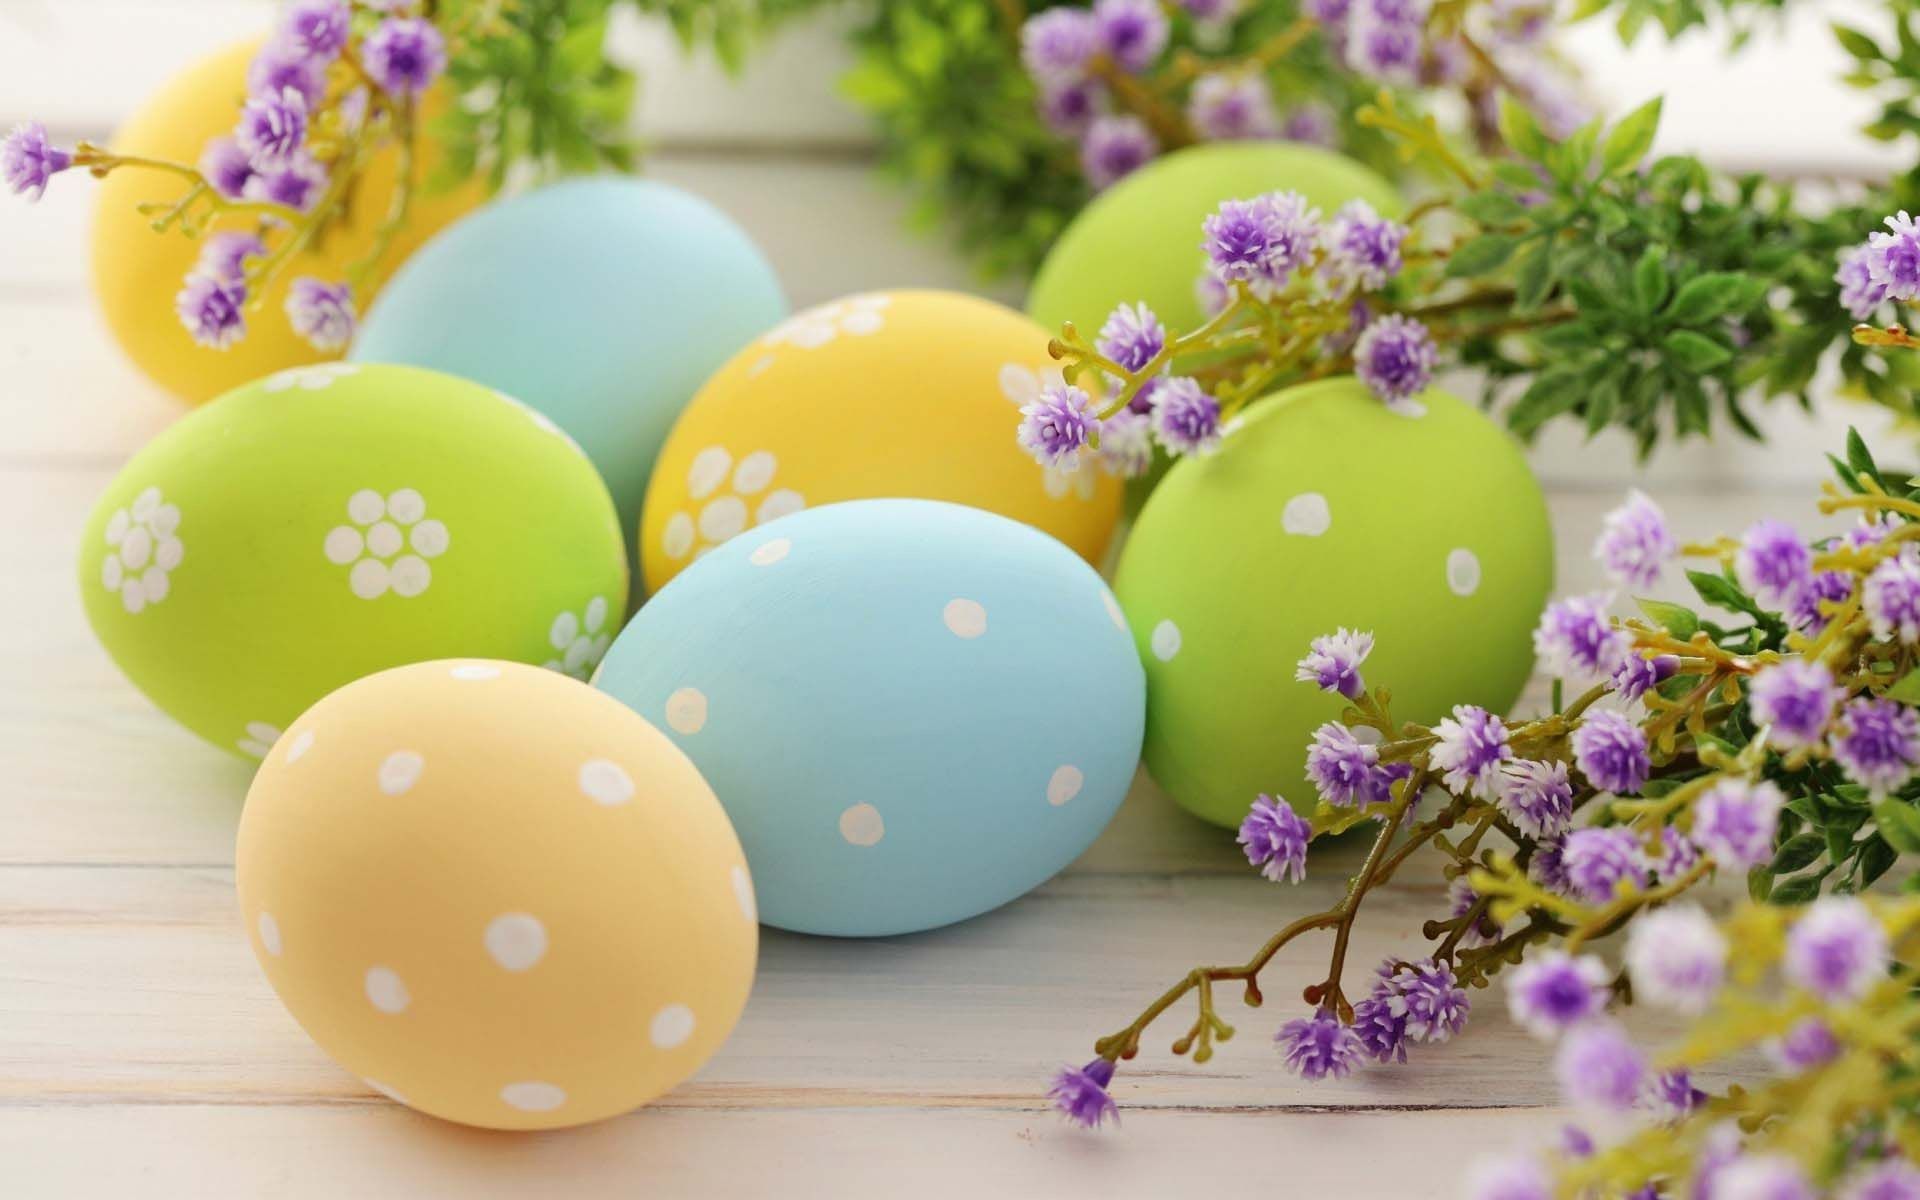 Happy Easter 2020 HD Wallpaper. HD Background Image. Photo